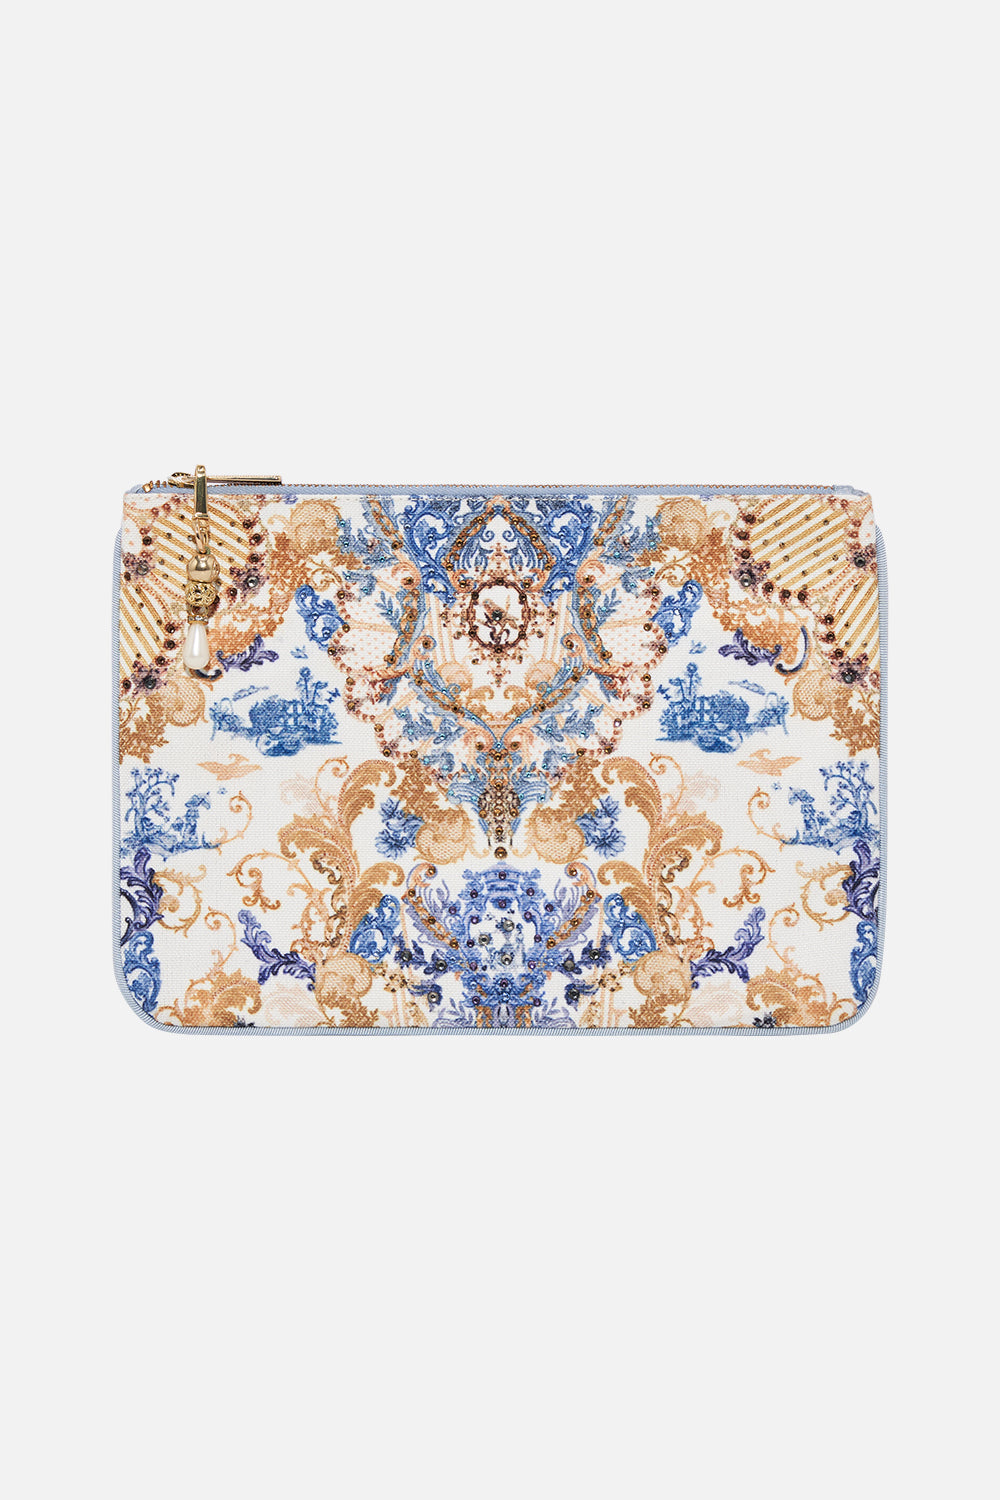 Product view of CAMILLA clutch bag in Soul Searching print